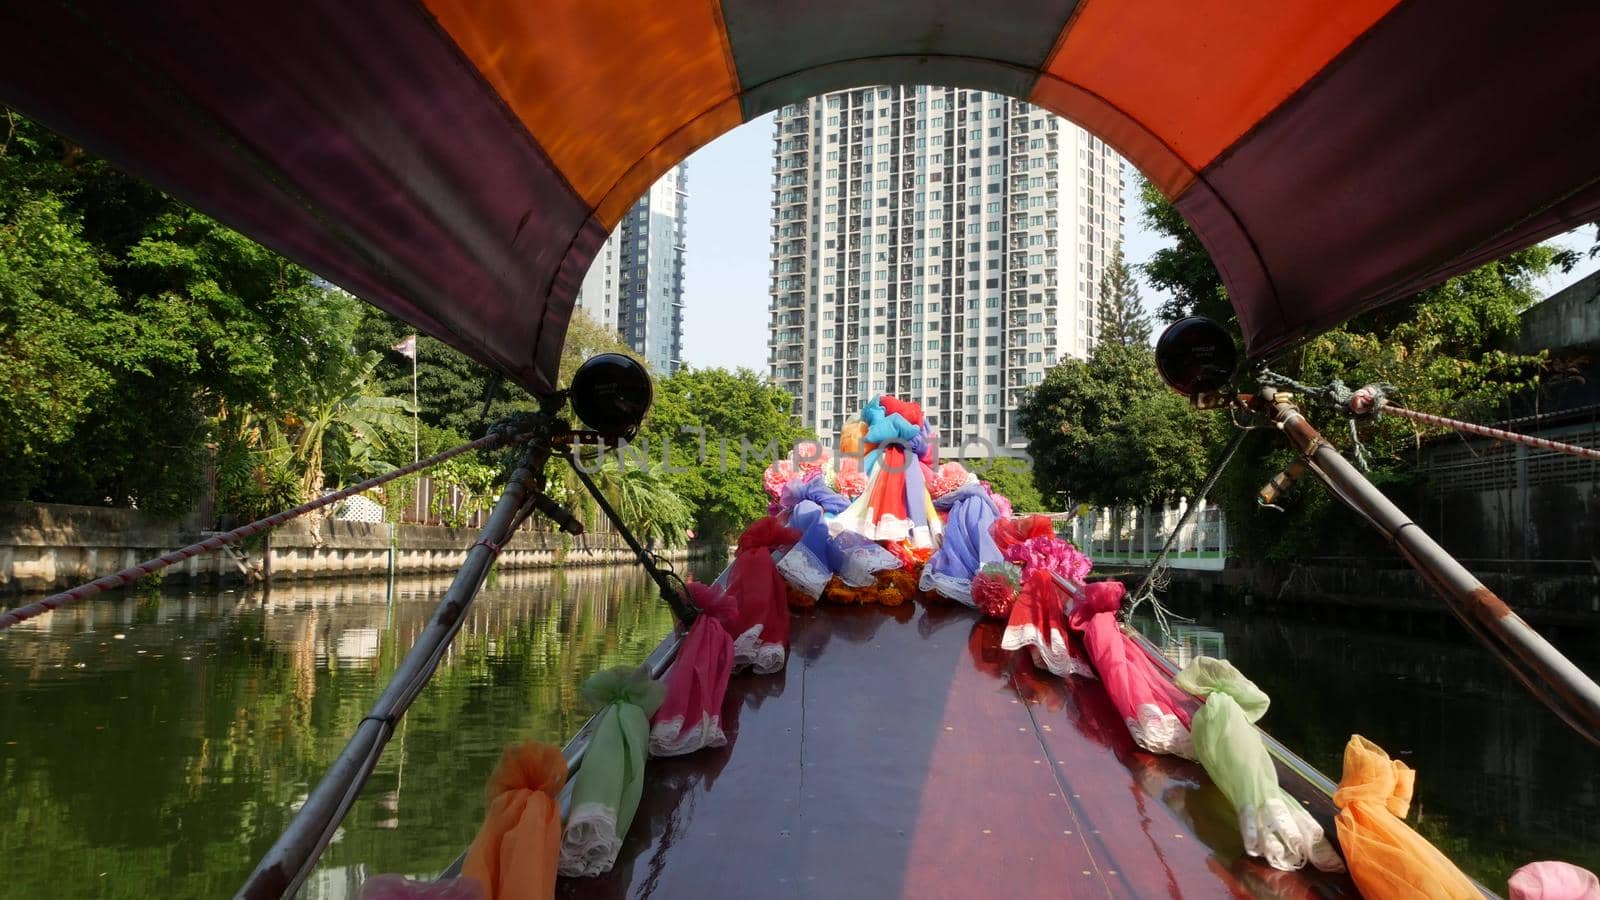 Tourist trip on Asian canal. View of calm channel and residential houses from decorated traditional Thai boat during tourist trip in Bangkok. by DogoraSun